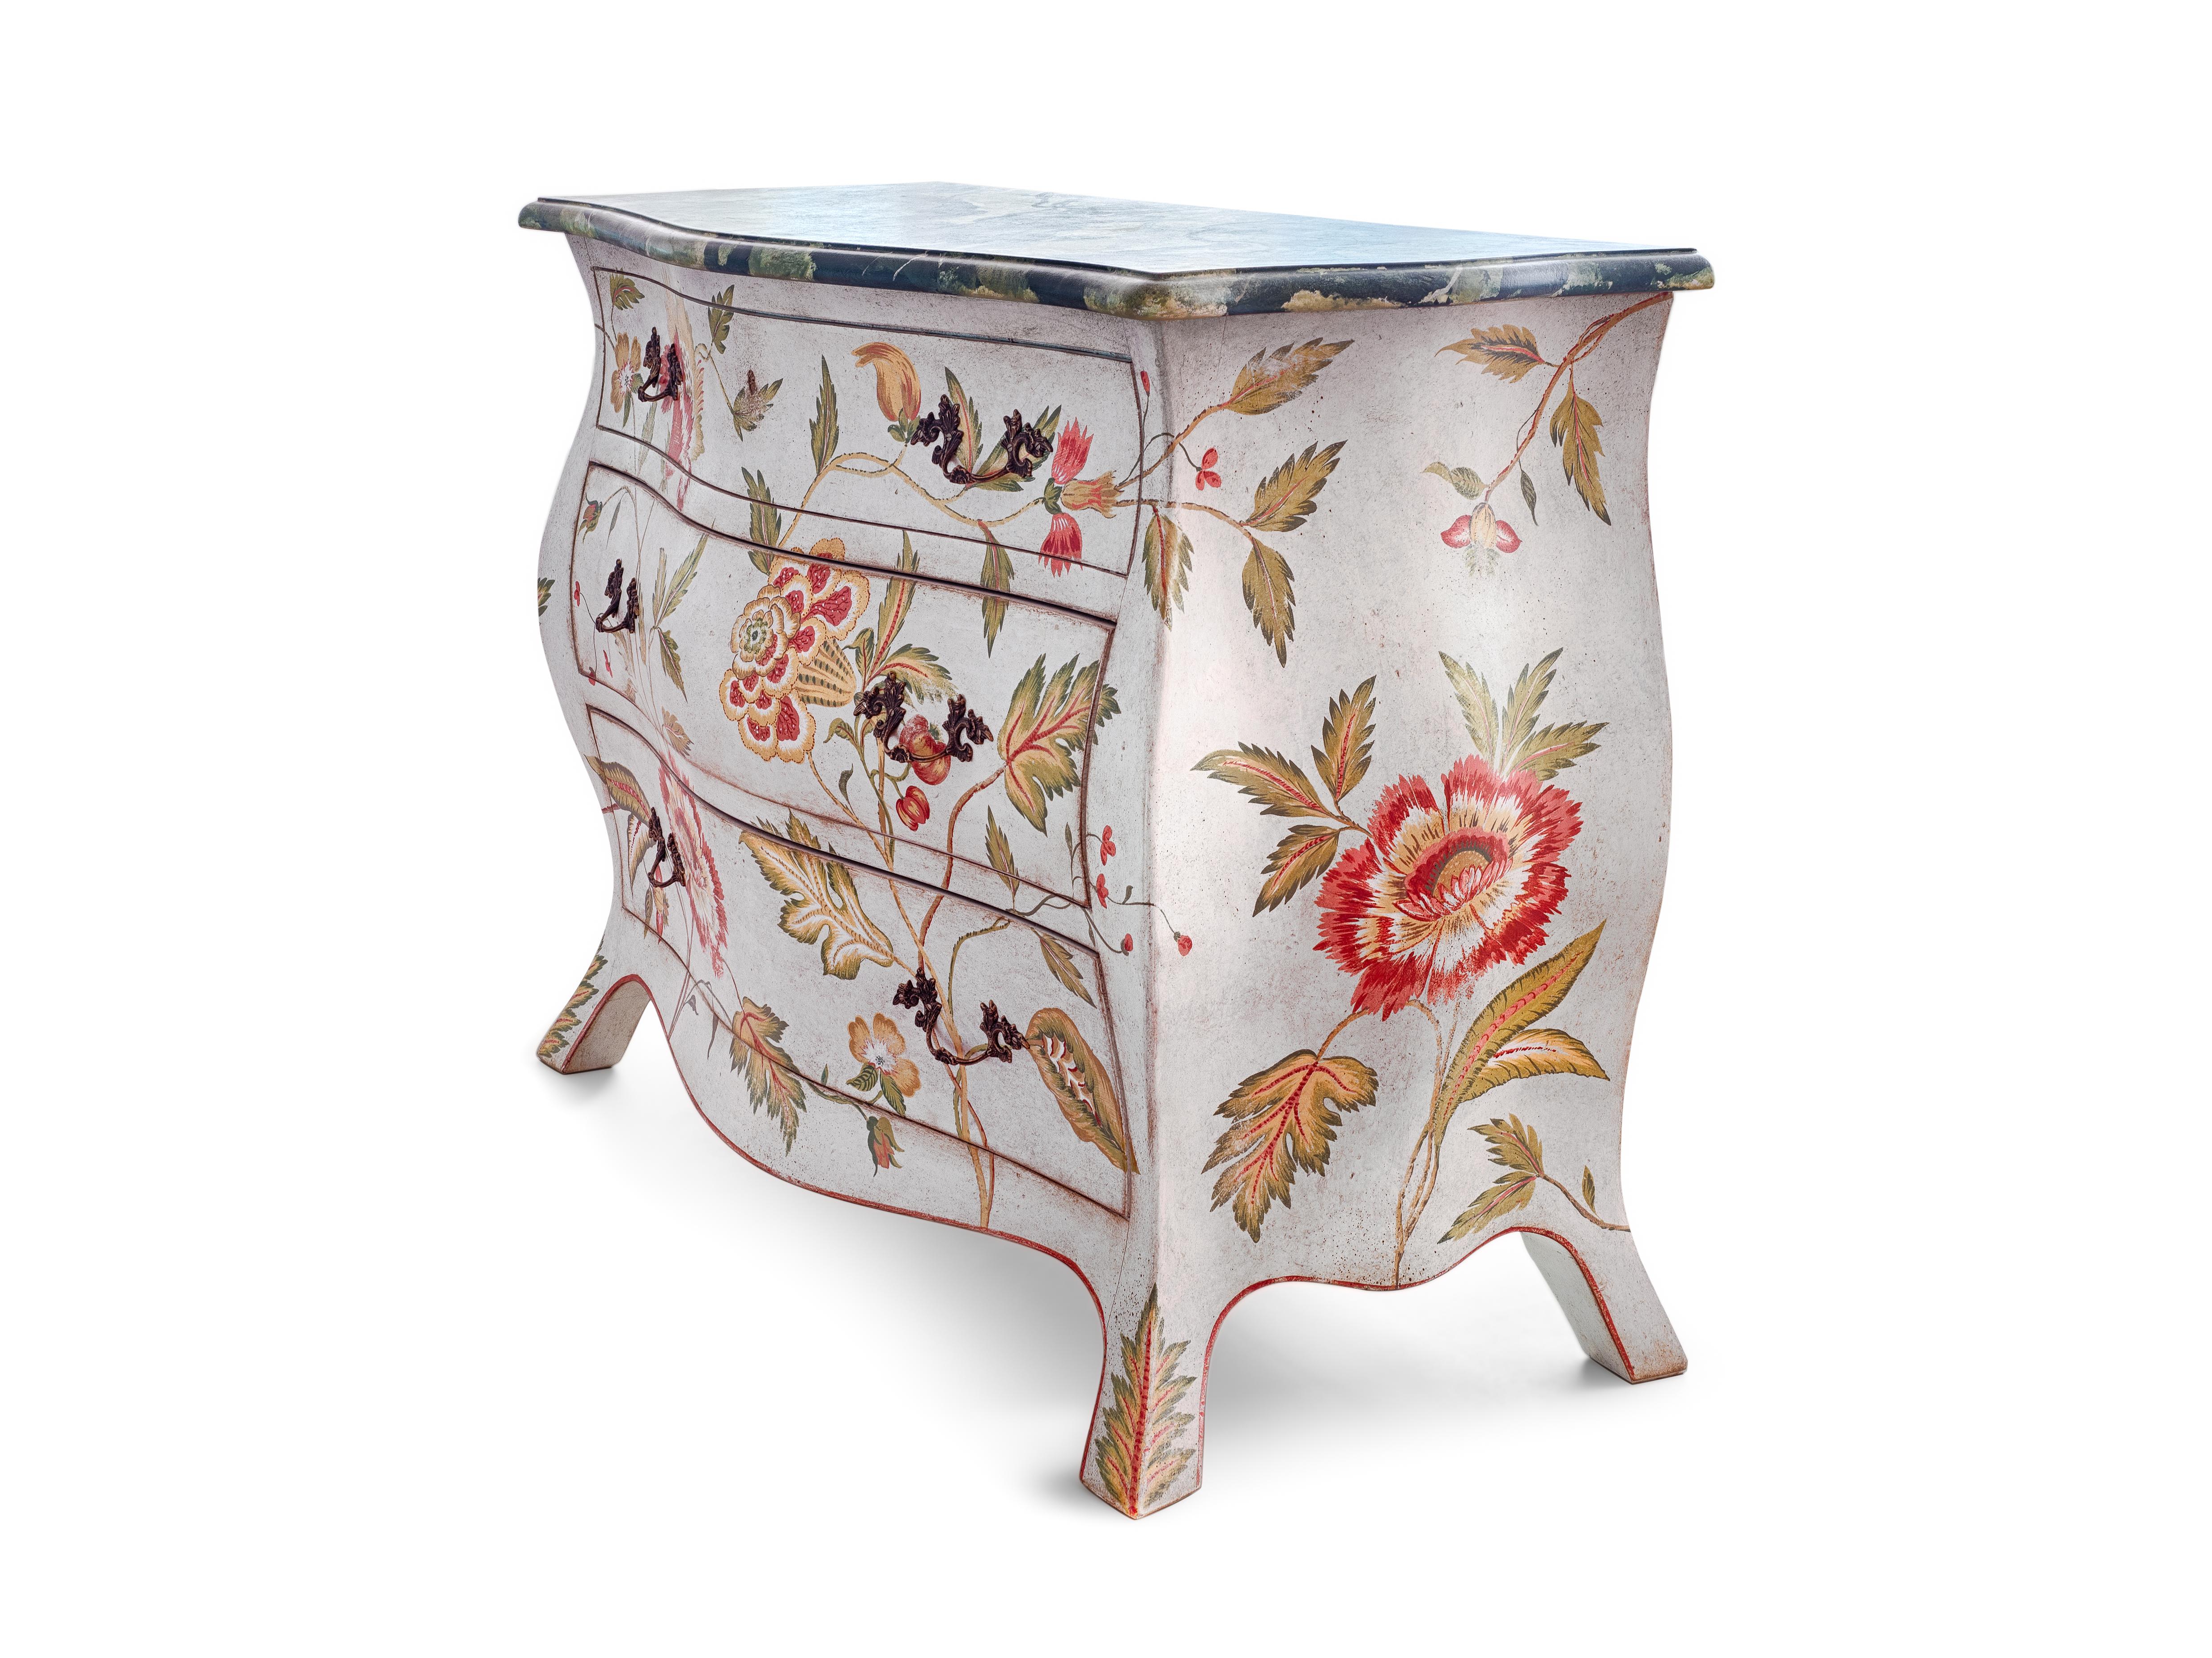 From our Hand-Painted Furniture Collection, we are pleased to introduce you to our Asolo chest with Jacobean inspired decors and green marble effect top. 
Each piece from our Collections is entirely hand-painted on every side of the Furniture by